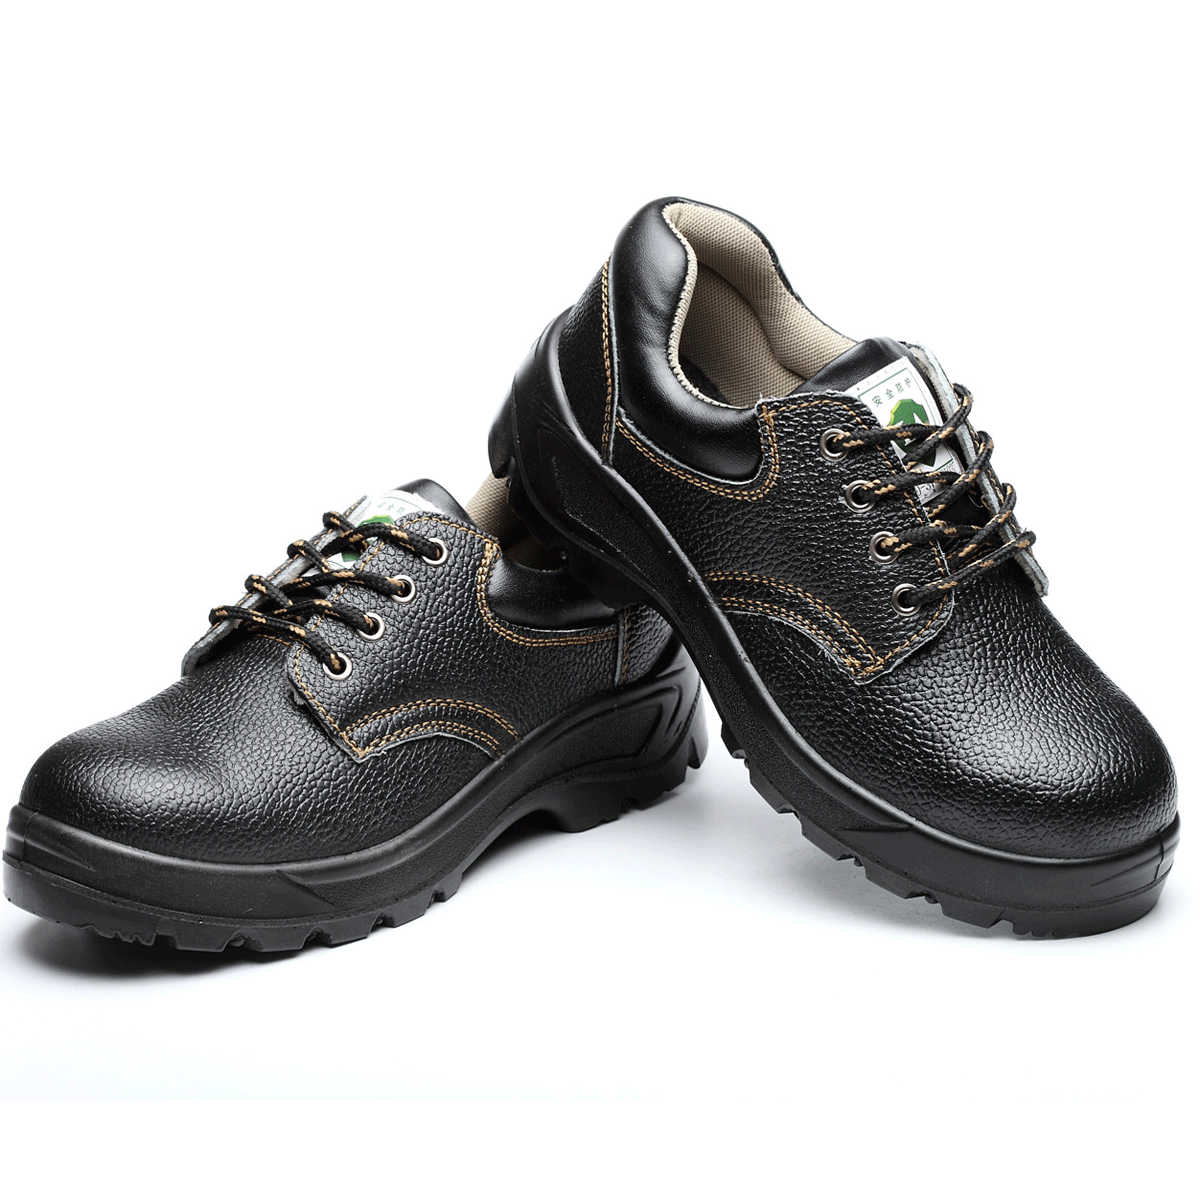 black leather low antisquashy steel head safety shoes/anti smashing puncture proof shoes